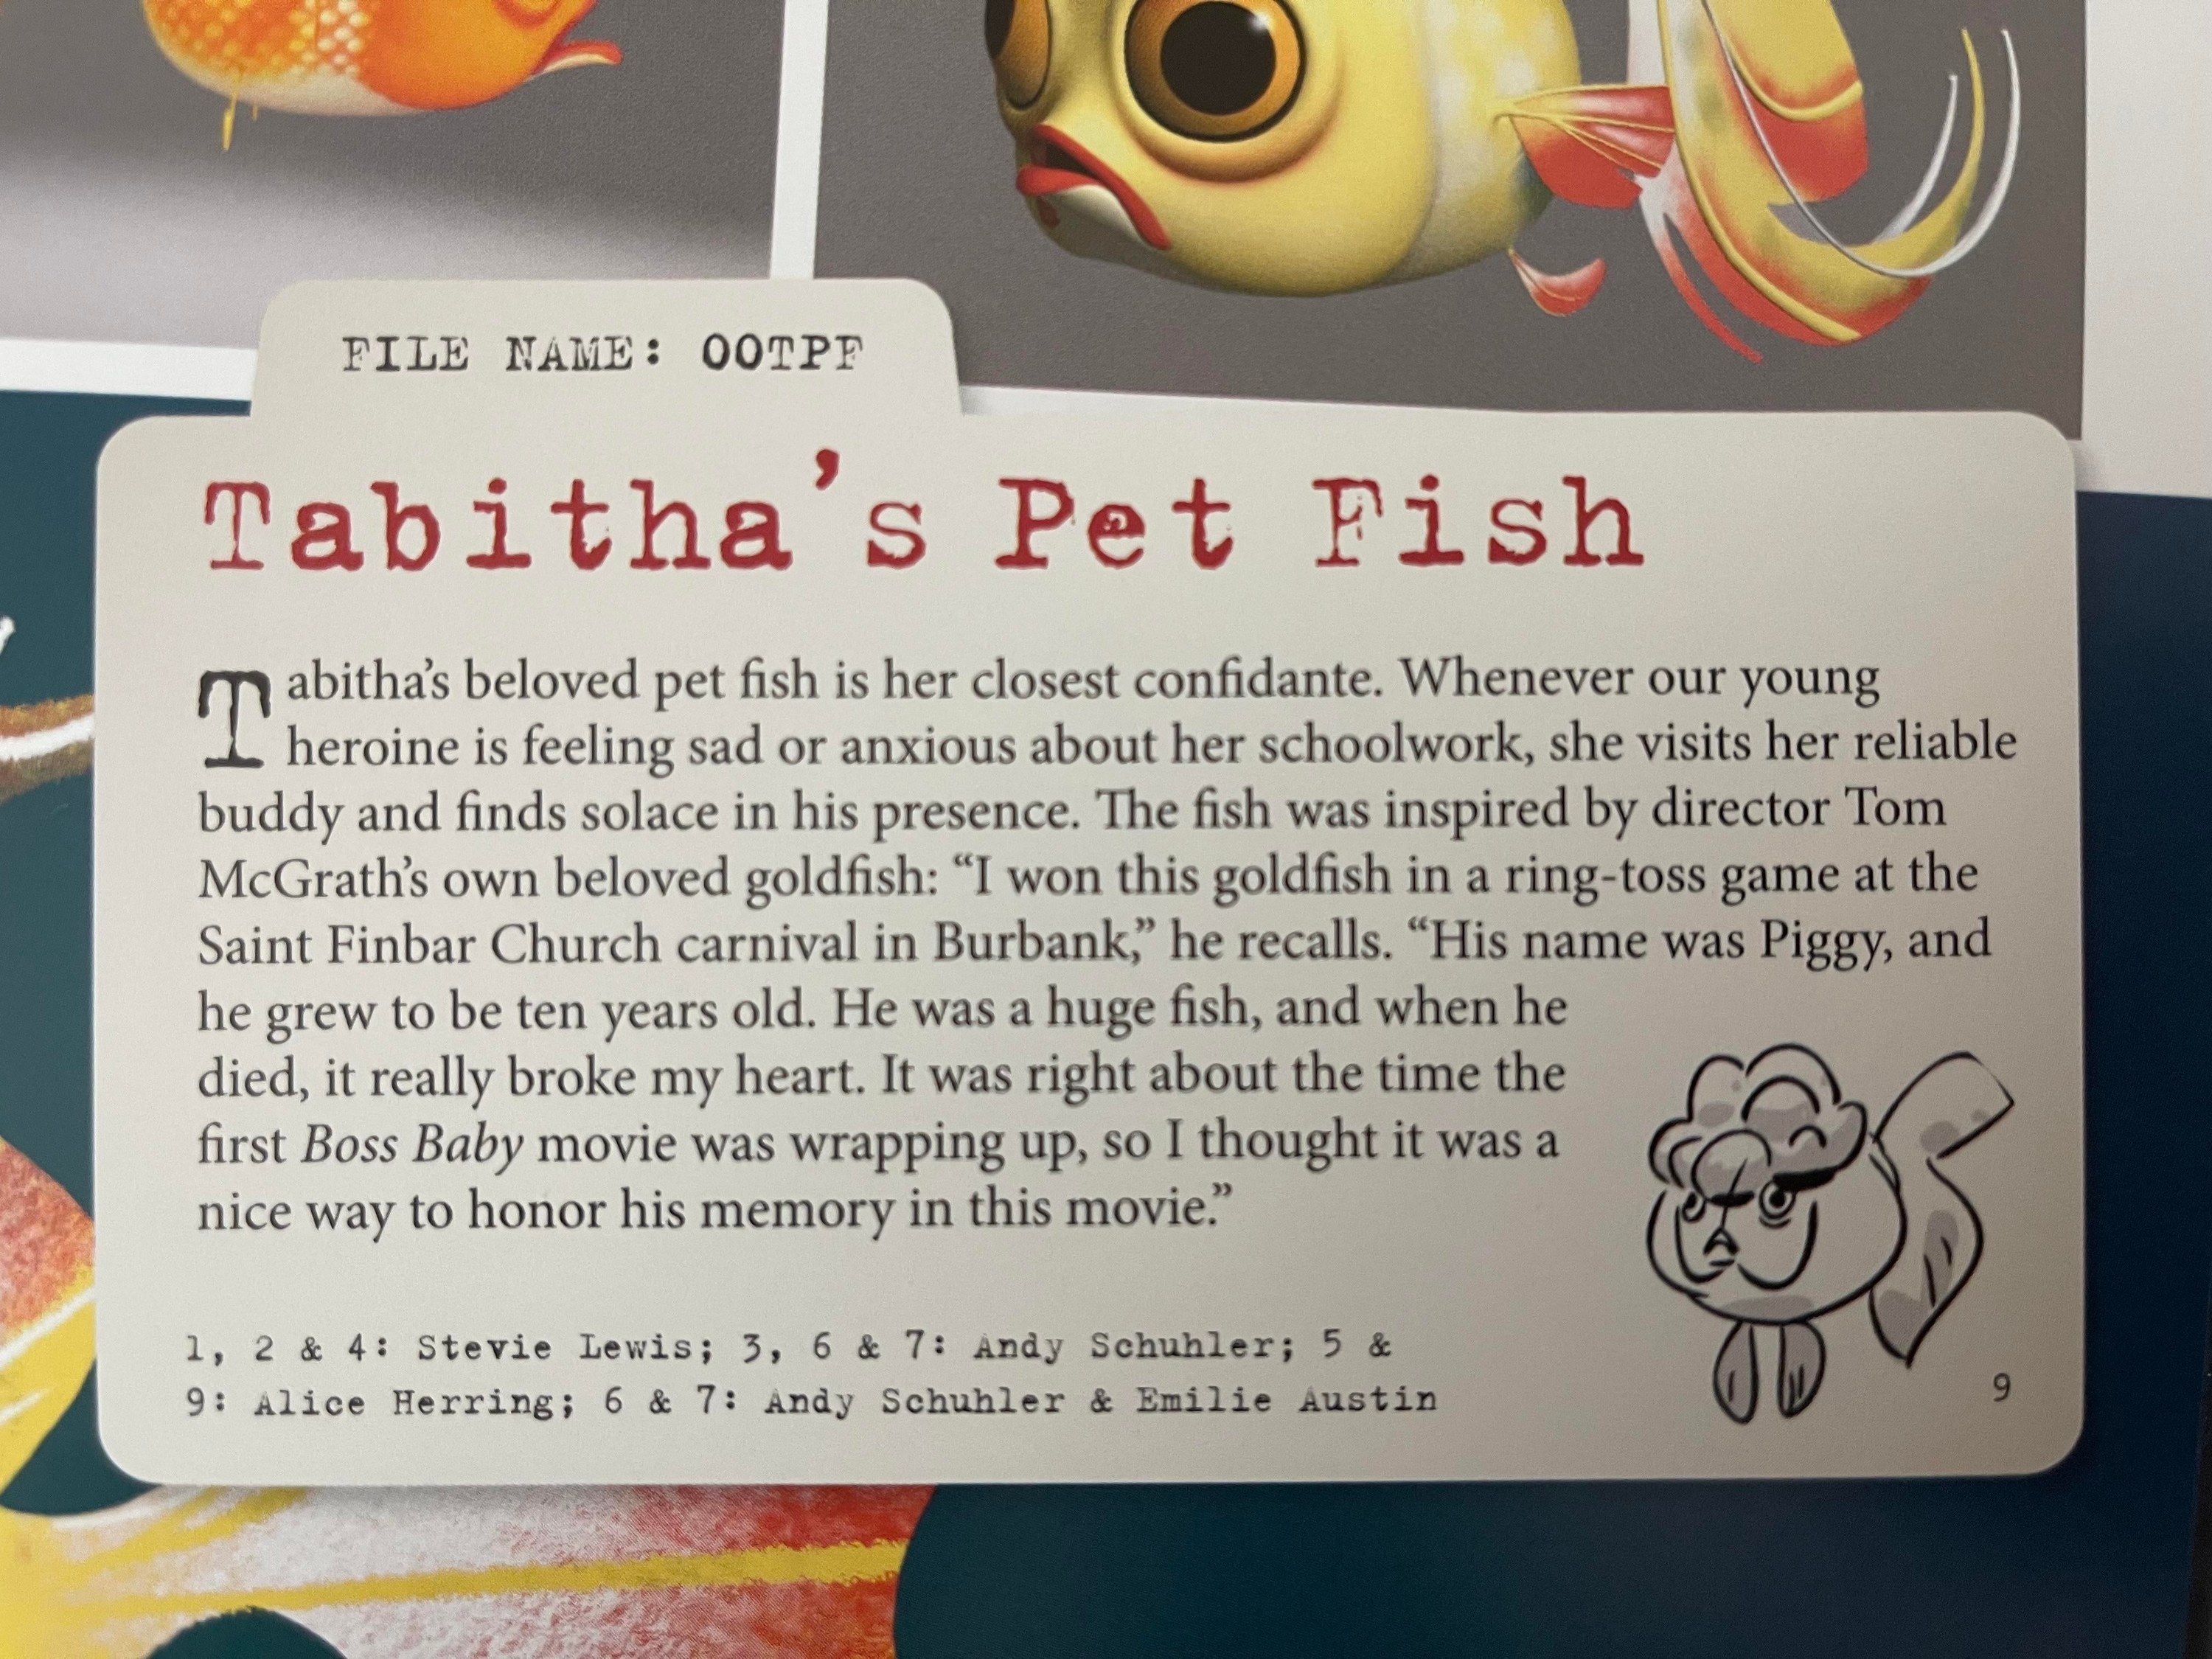 Page from a book telling the story of McGrath&#x27;s goldfish he won at a carnival in Burbank and how he was brokenhearted when he died as the movie was wrapping up